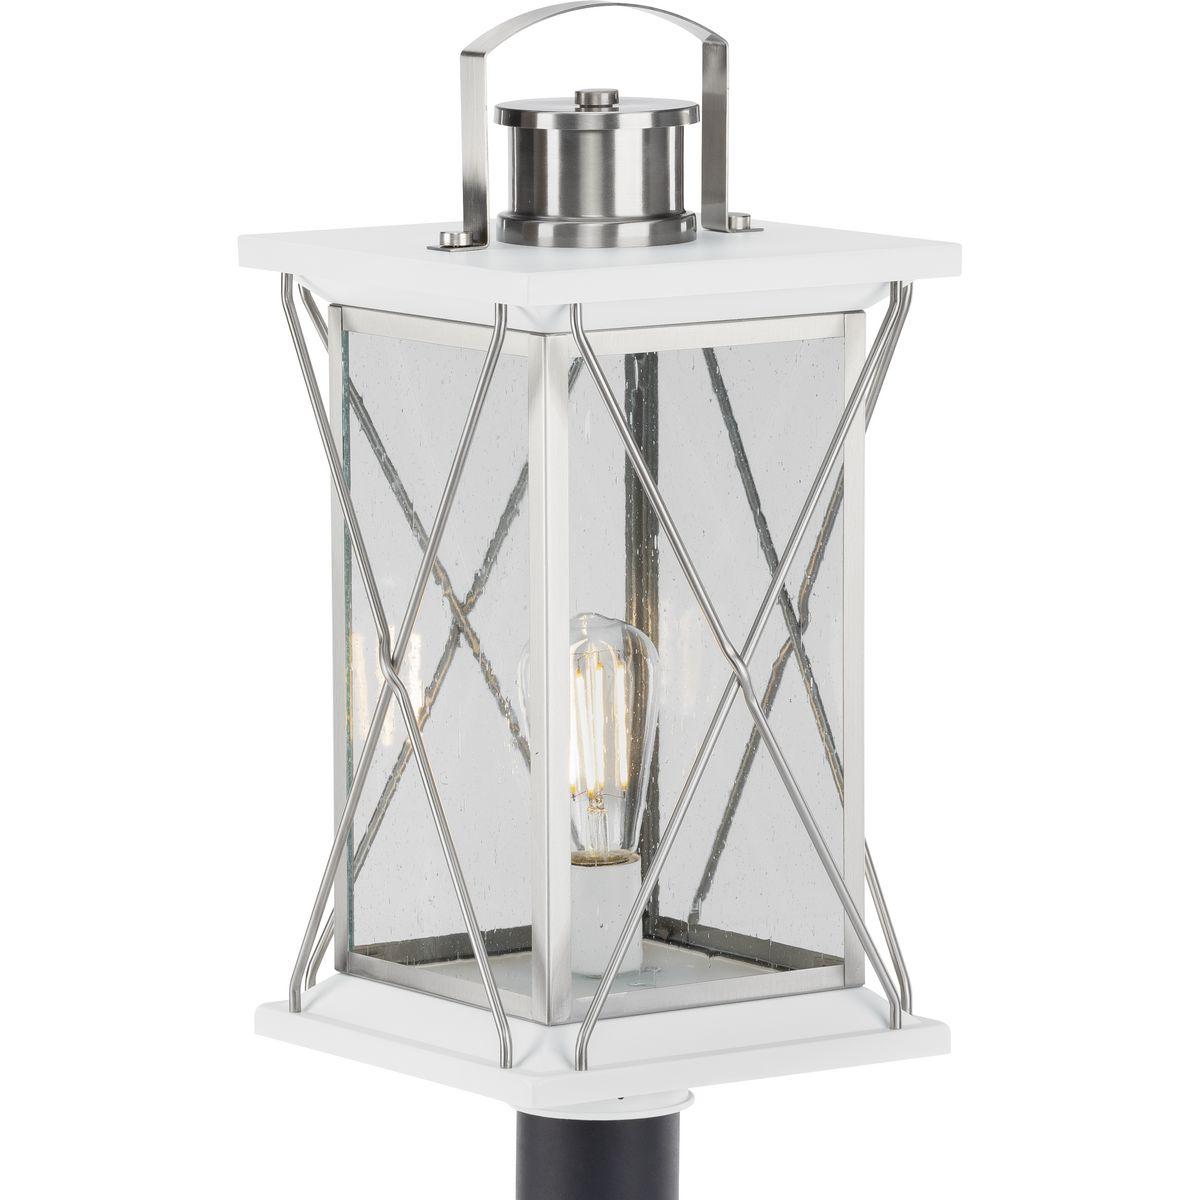 Hubbell P540068-135 Transform your home into a warm and cozy dream with the friendly farmhouse-style of this post lantern. A rustic X-brace design decorates each side of the charming lantern silhouette. Clear seeded glass panes add an extra pop of rustic personality. A stain